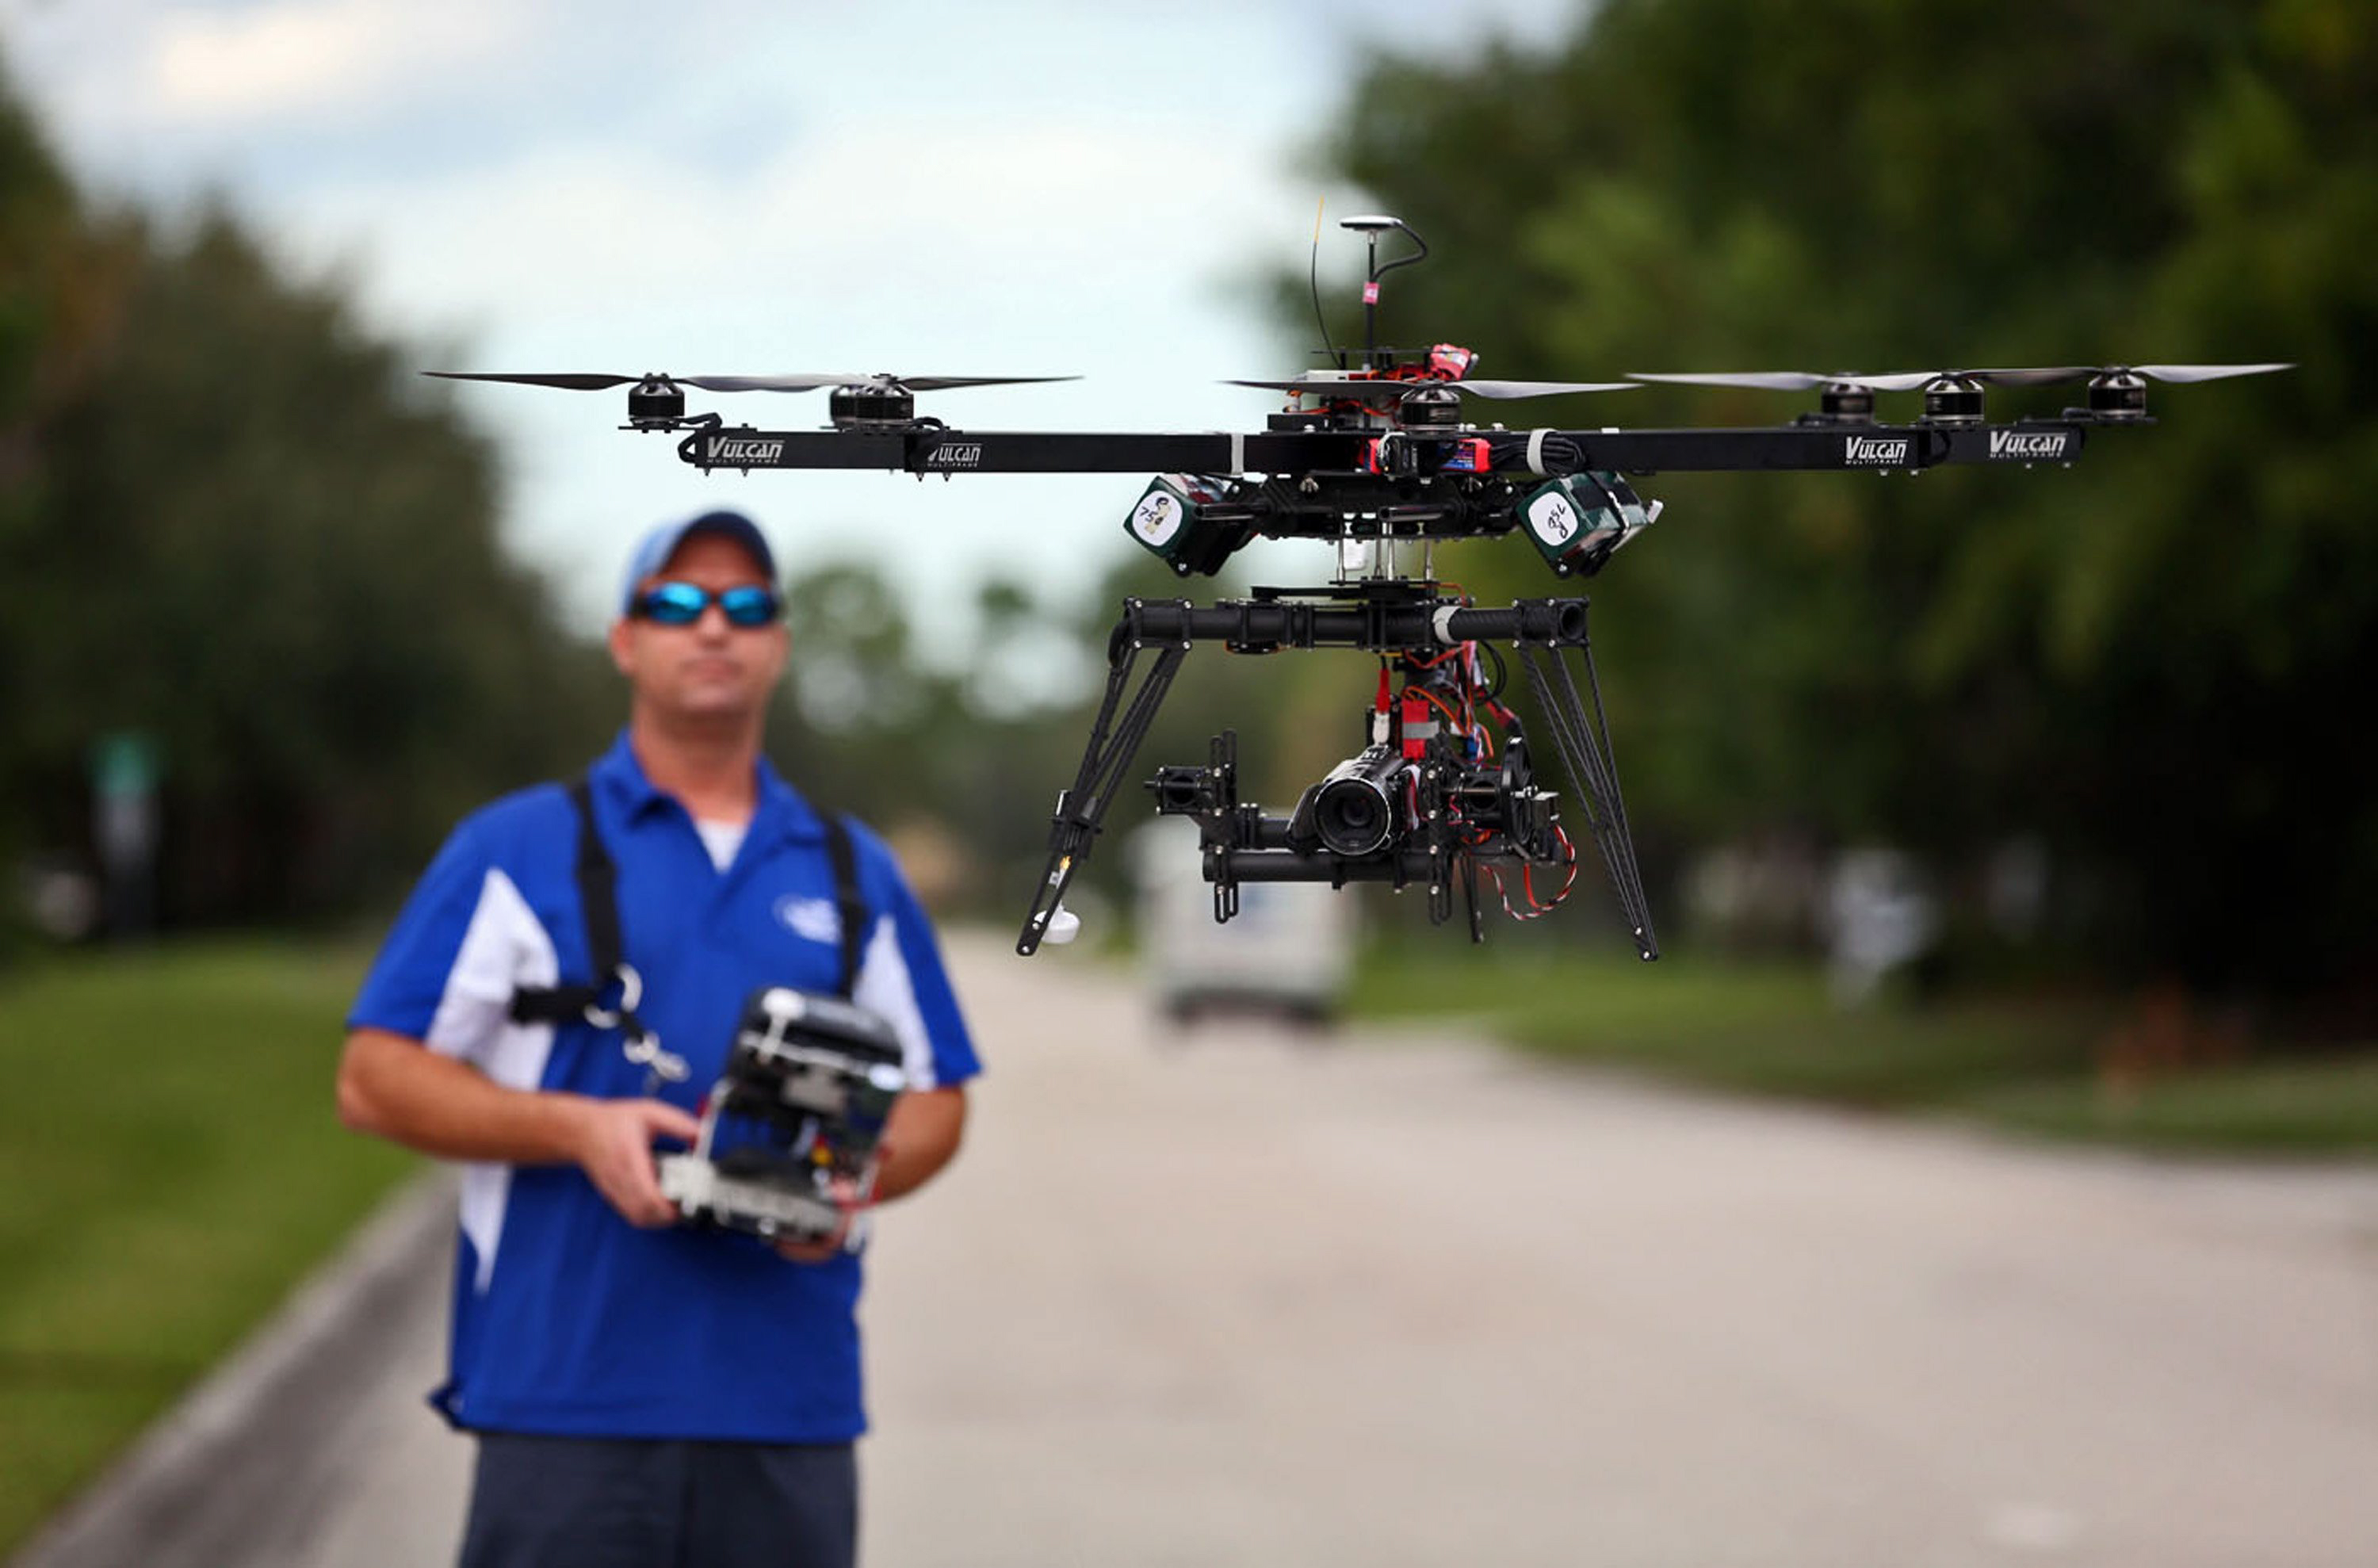 Don't want drones to creep up on you? Use a drone detector